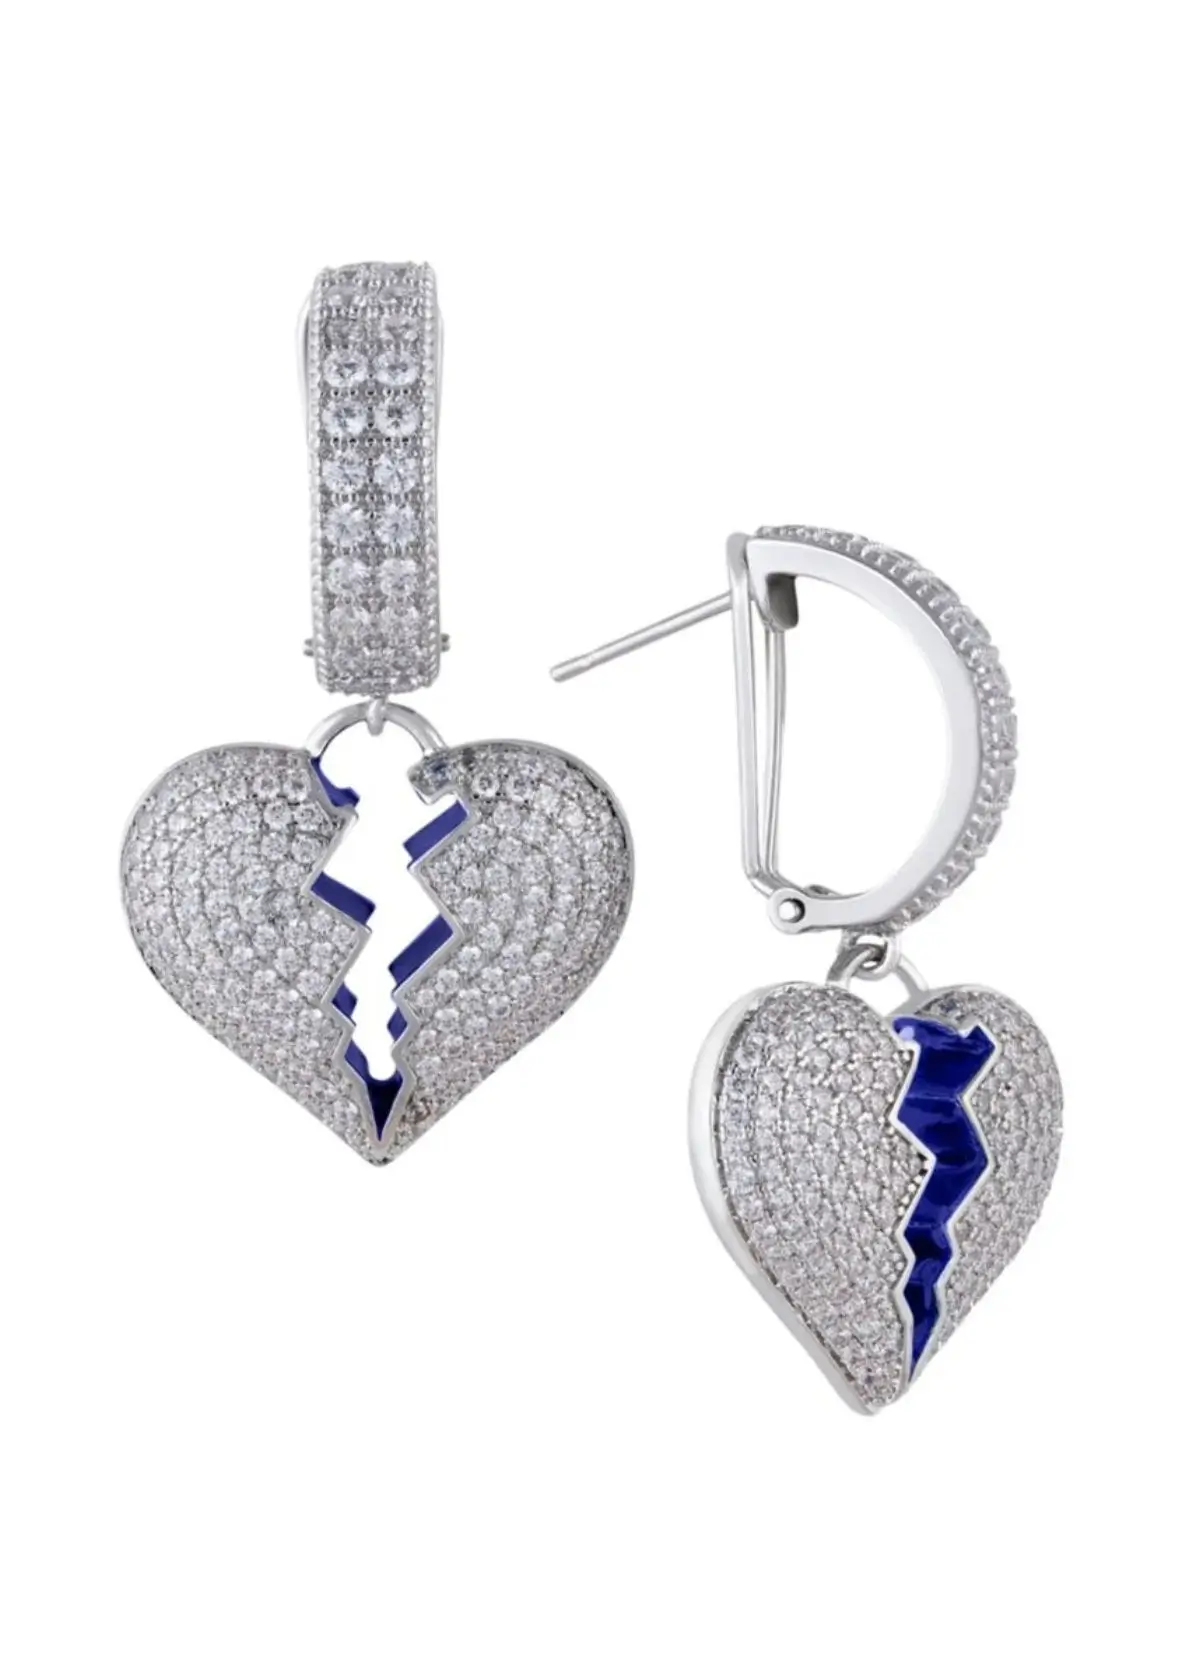 How to Choose the Right Broken Heart Earrings?